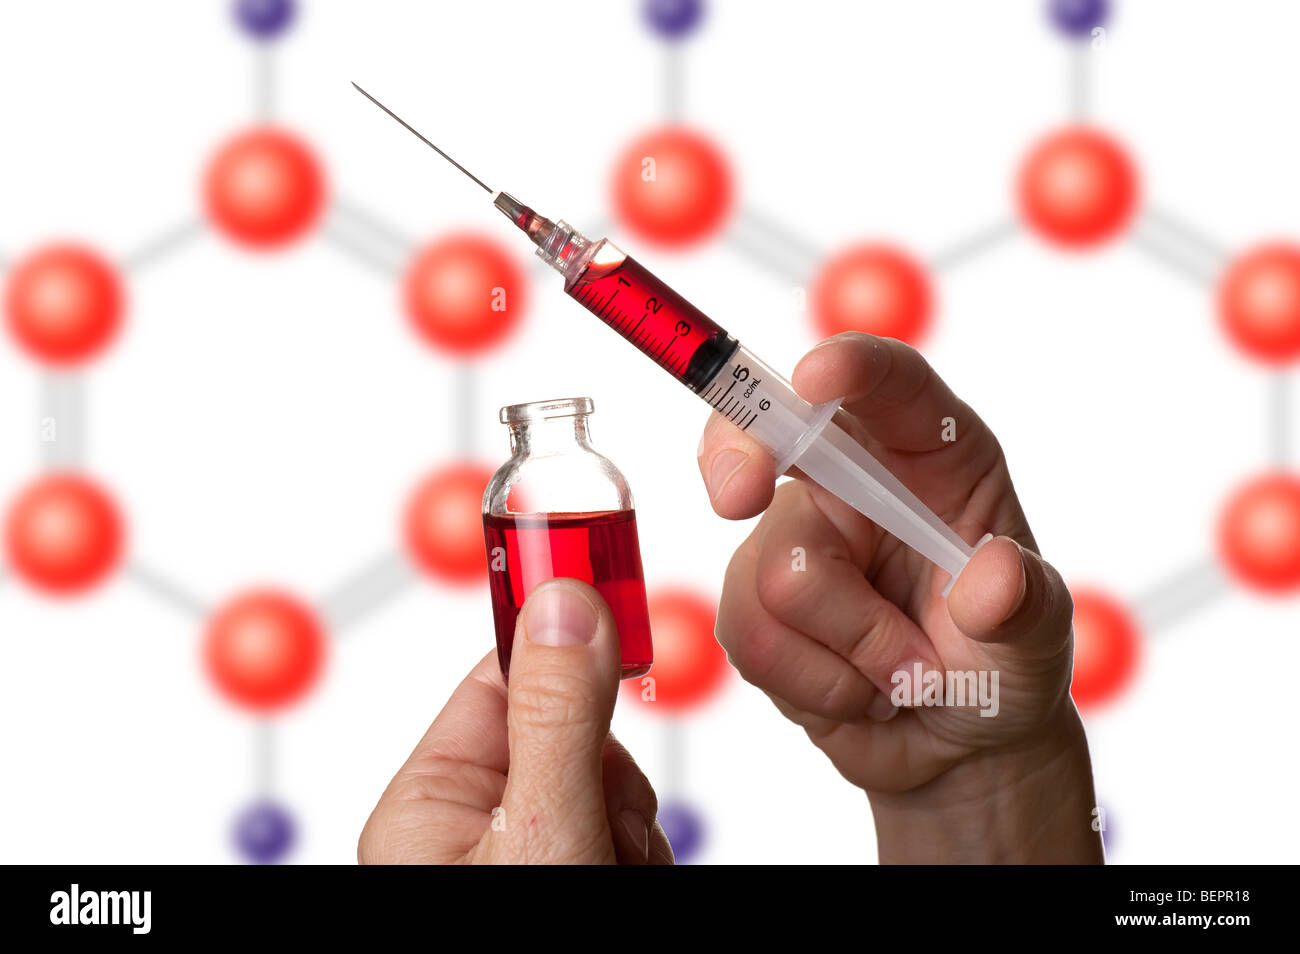 medical doctor holding hypodermic needle and vial Stock Photo